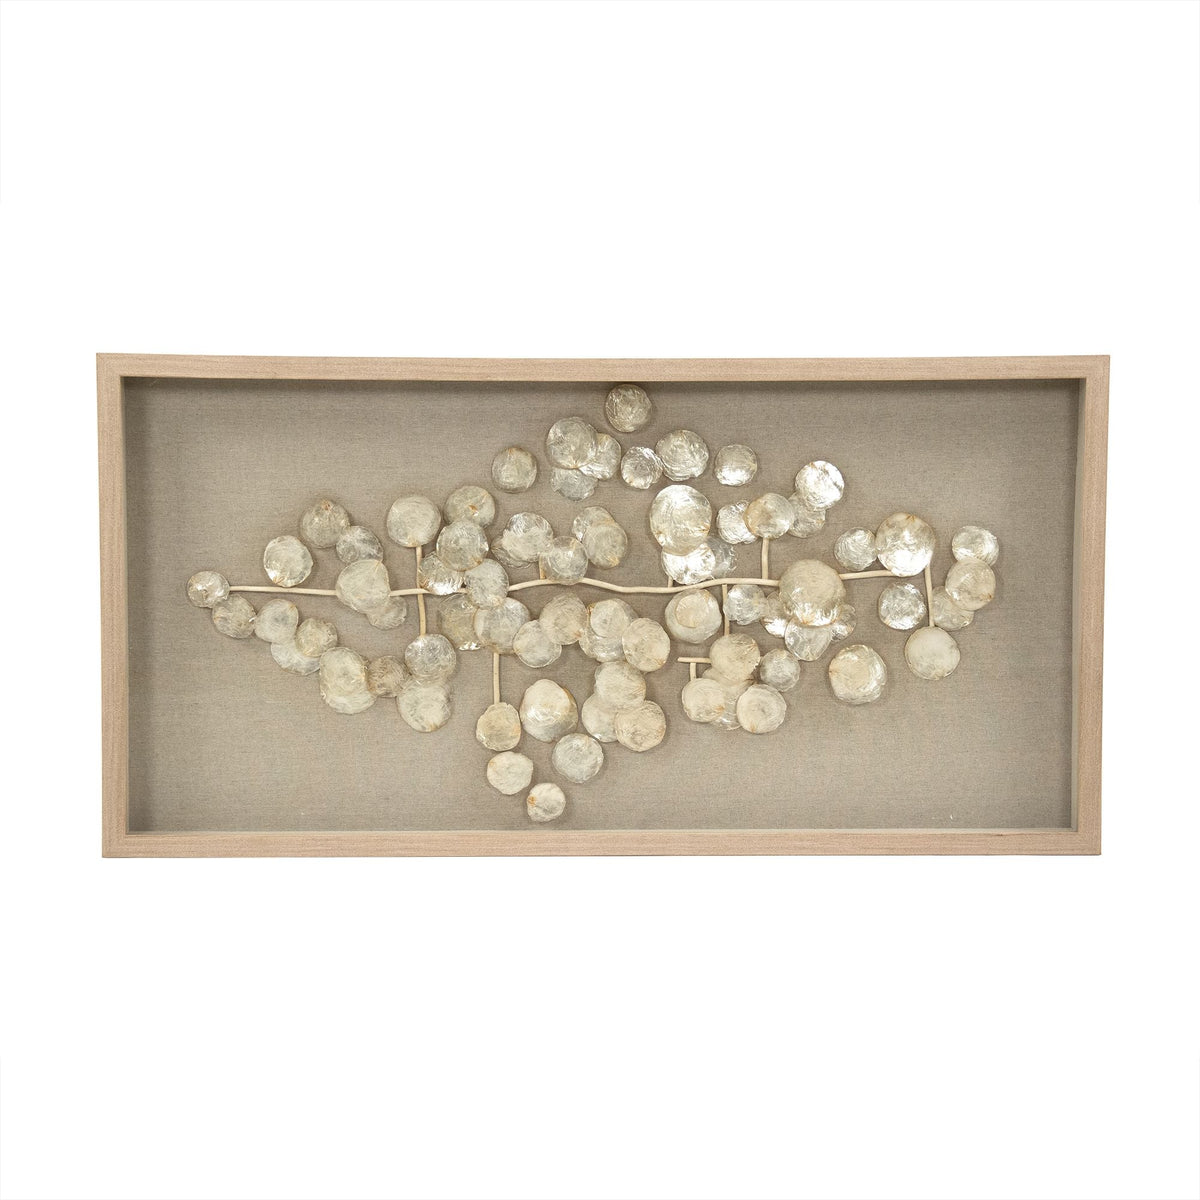 Abstract Mother of Pearl Wall Art by Zentique